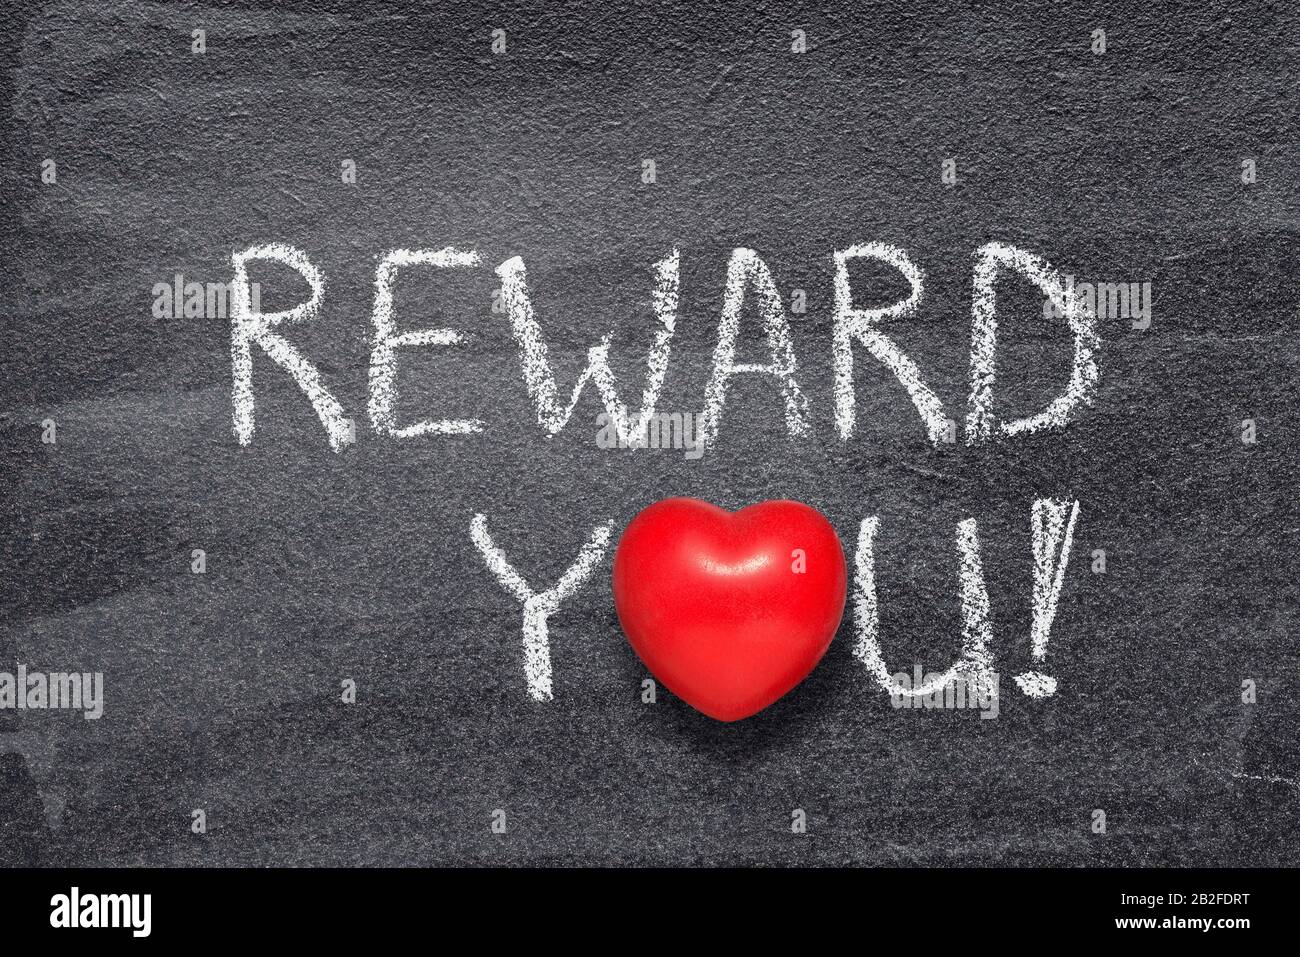 reward you exclamation written on chalkboard with red heart symbol Stock Photo